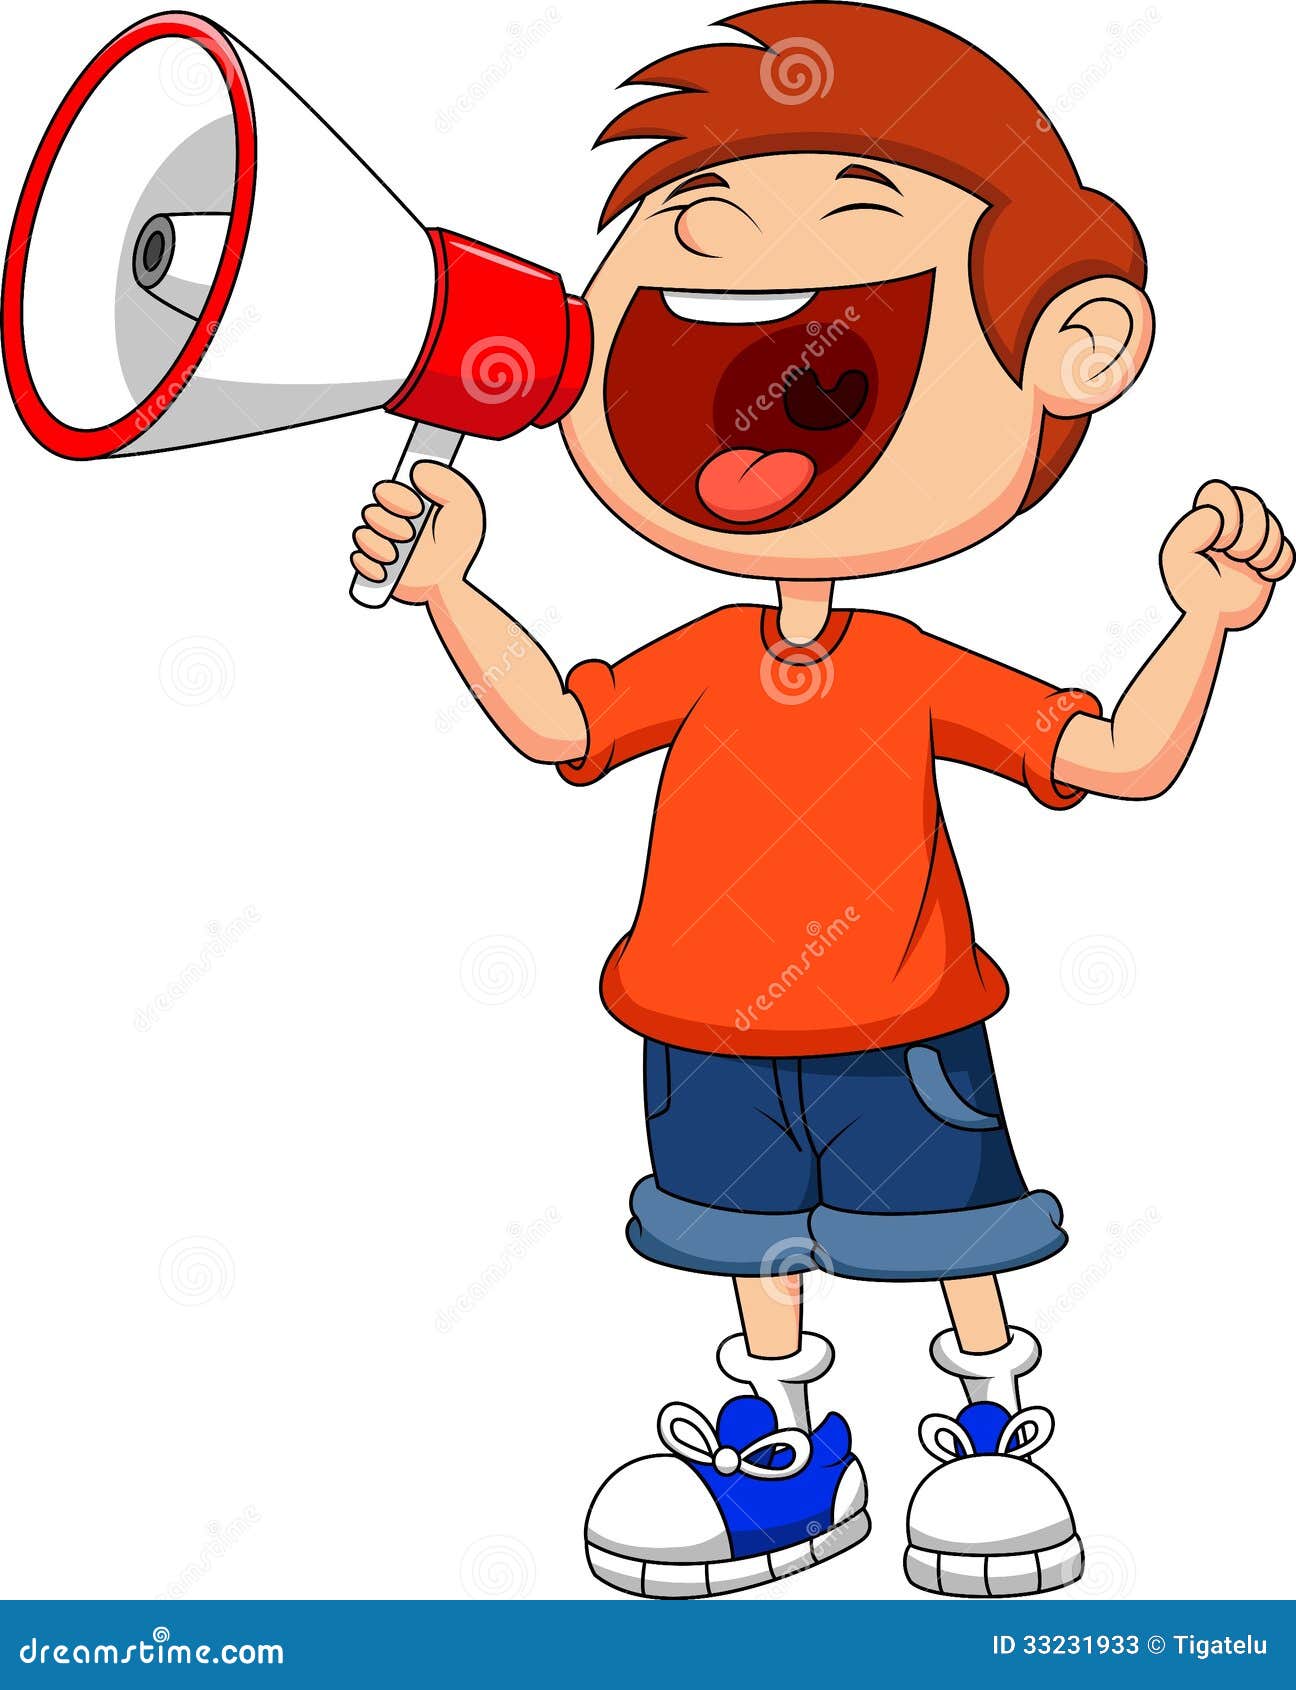 cartoon boy yelling and shouting into a megaphone